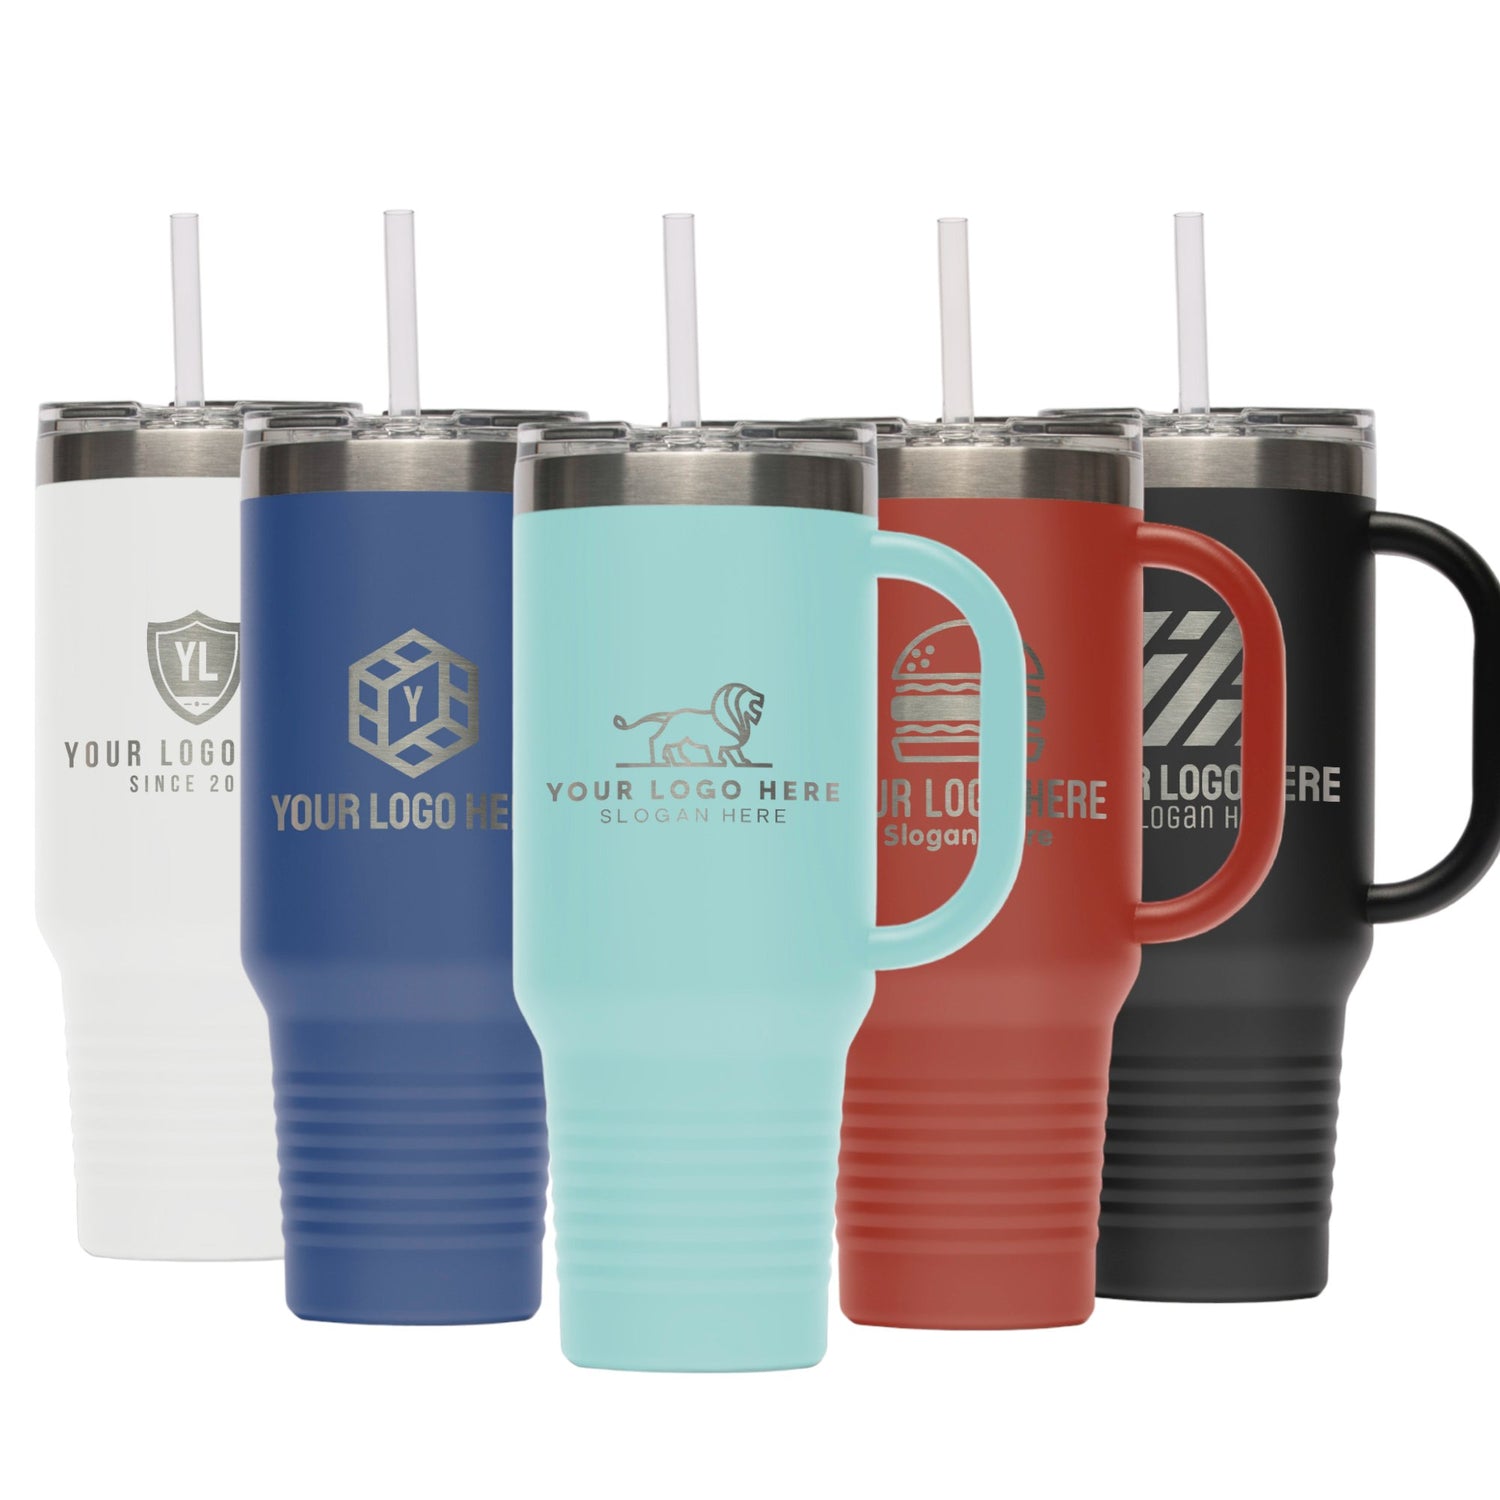 Personalized 20oz Tumbler, ADD YOUR LOGO, Wholesale Tumblers, Laser  Engraved Cup, Cooperate Gift, Branded, Powder Coated, Bulk Tumblers 